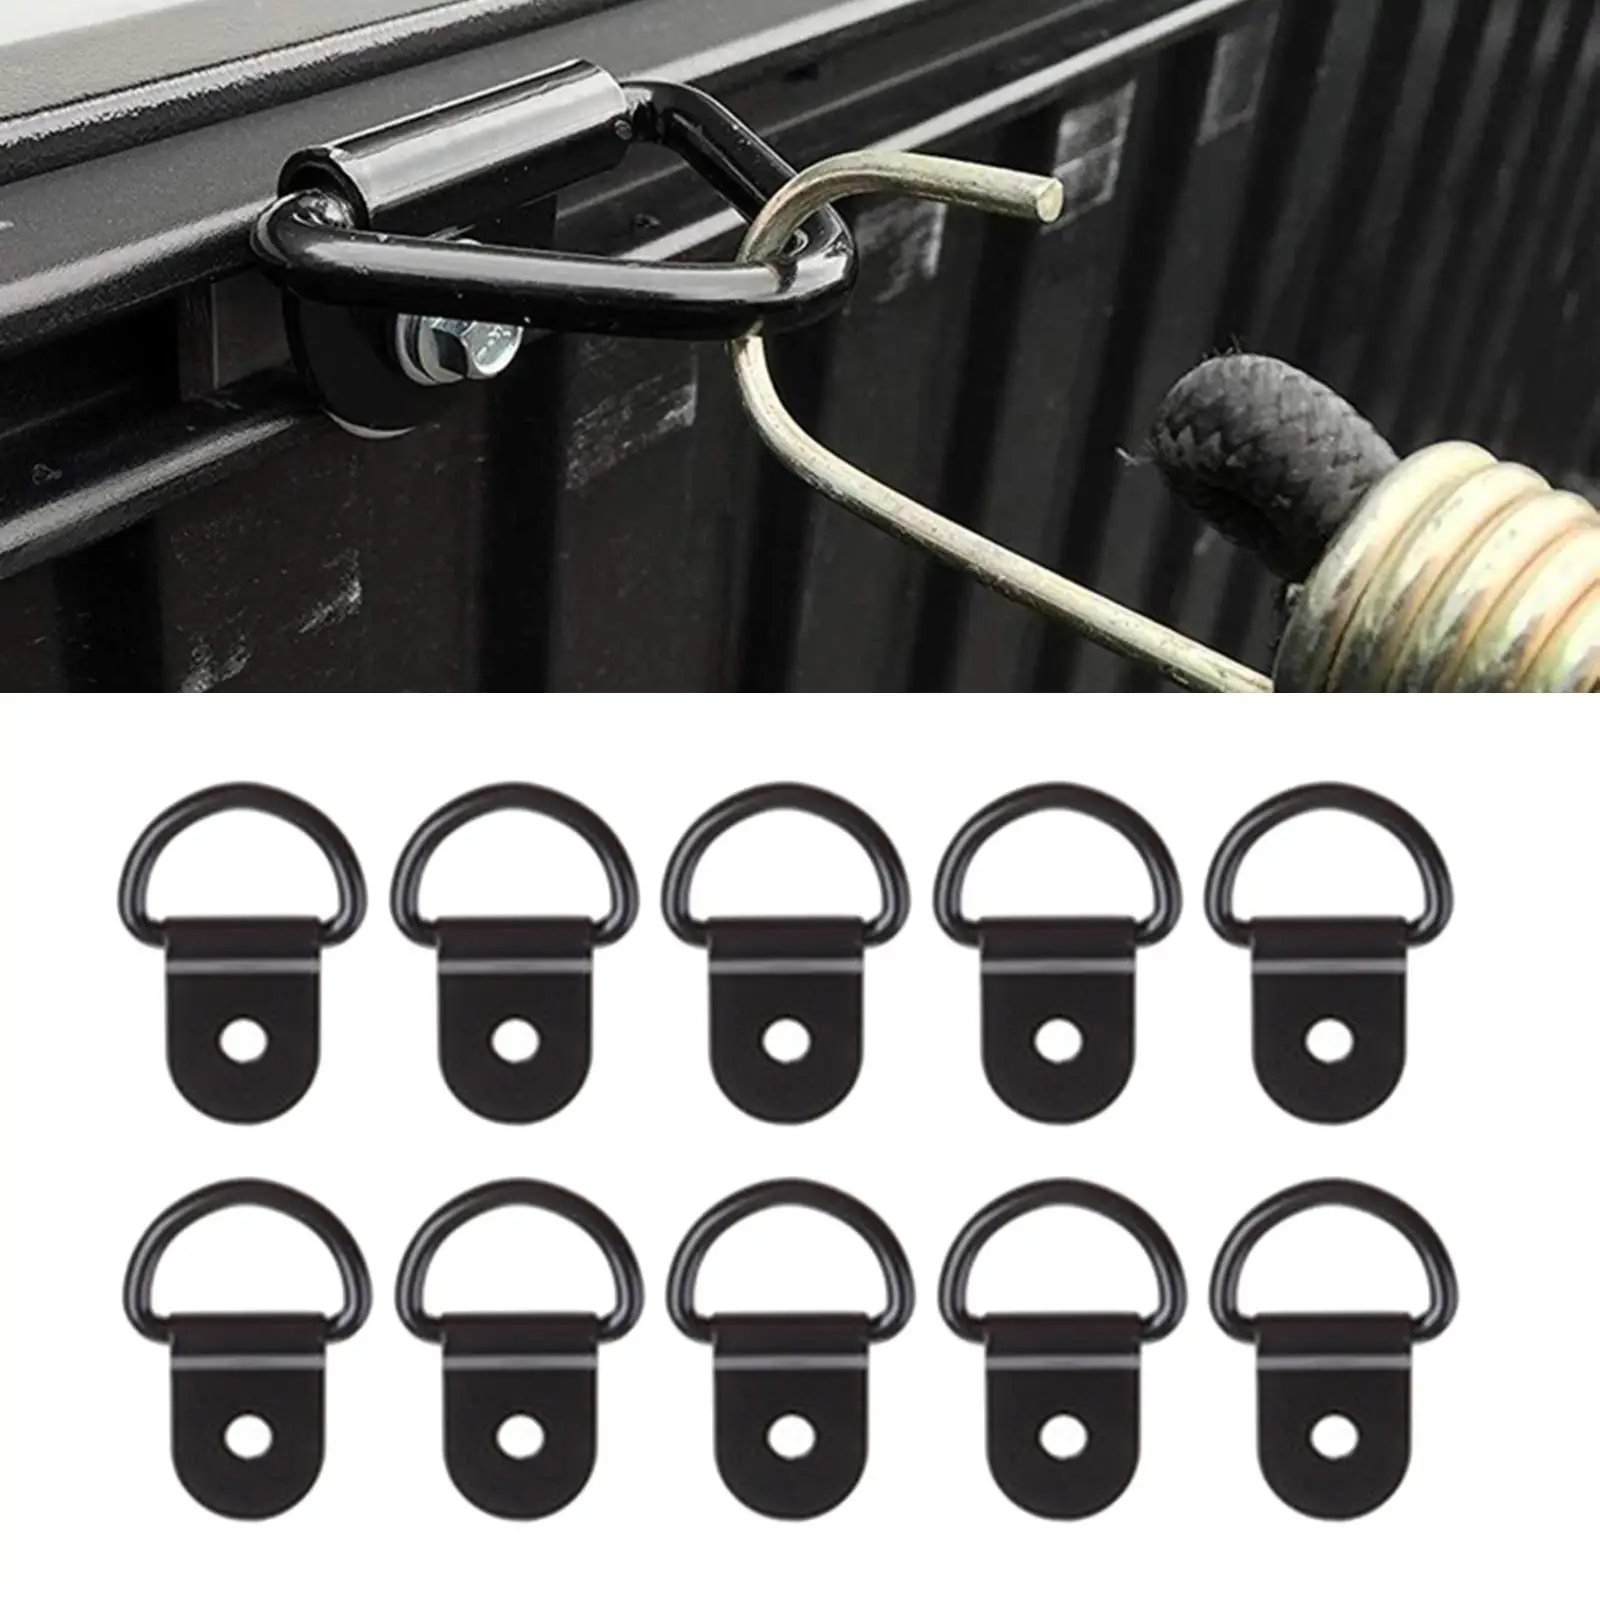 2x 10Pcs D Rings  Anchors, Stainless Steel Pull Hook Black Lashing    for Boats Loads on Case Truck Trailers